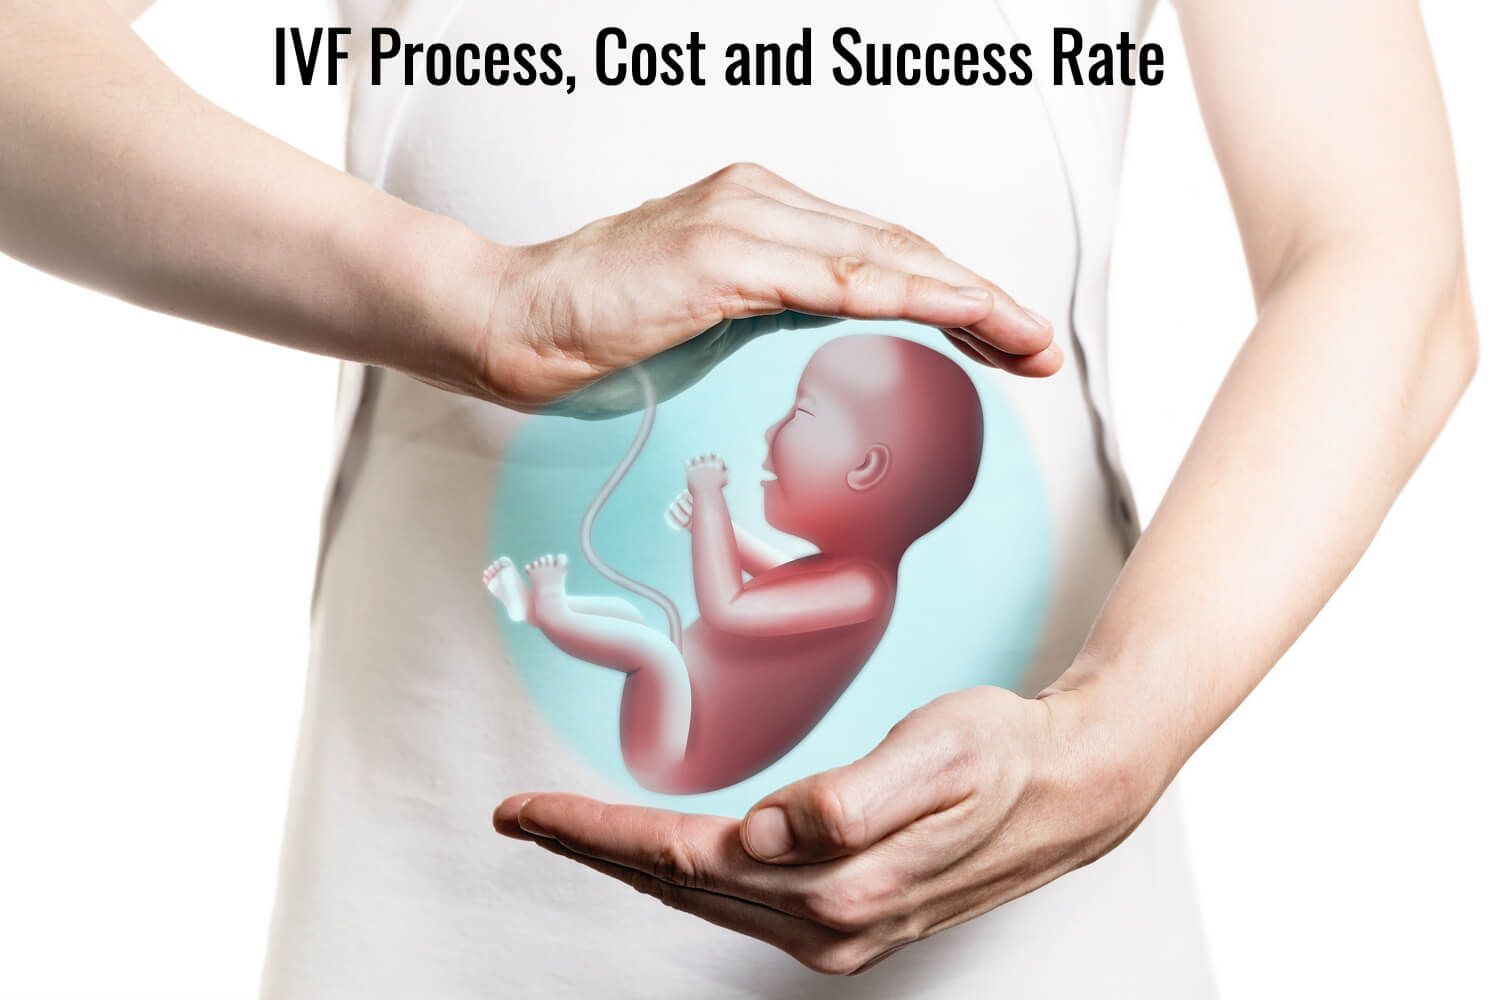 IVF cost and success rate